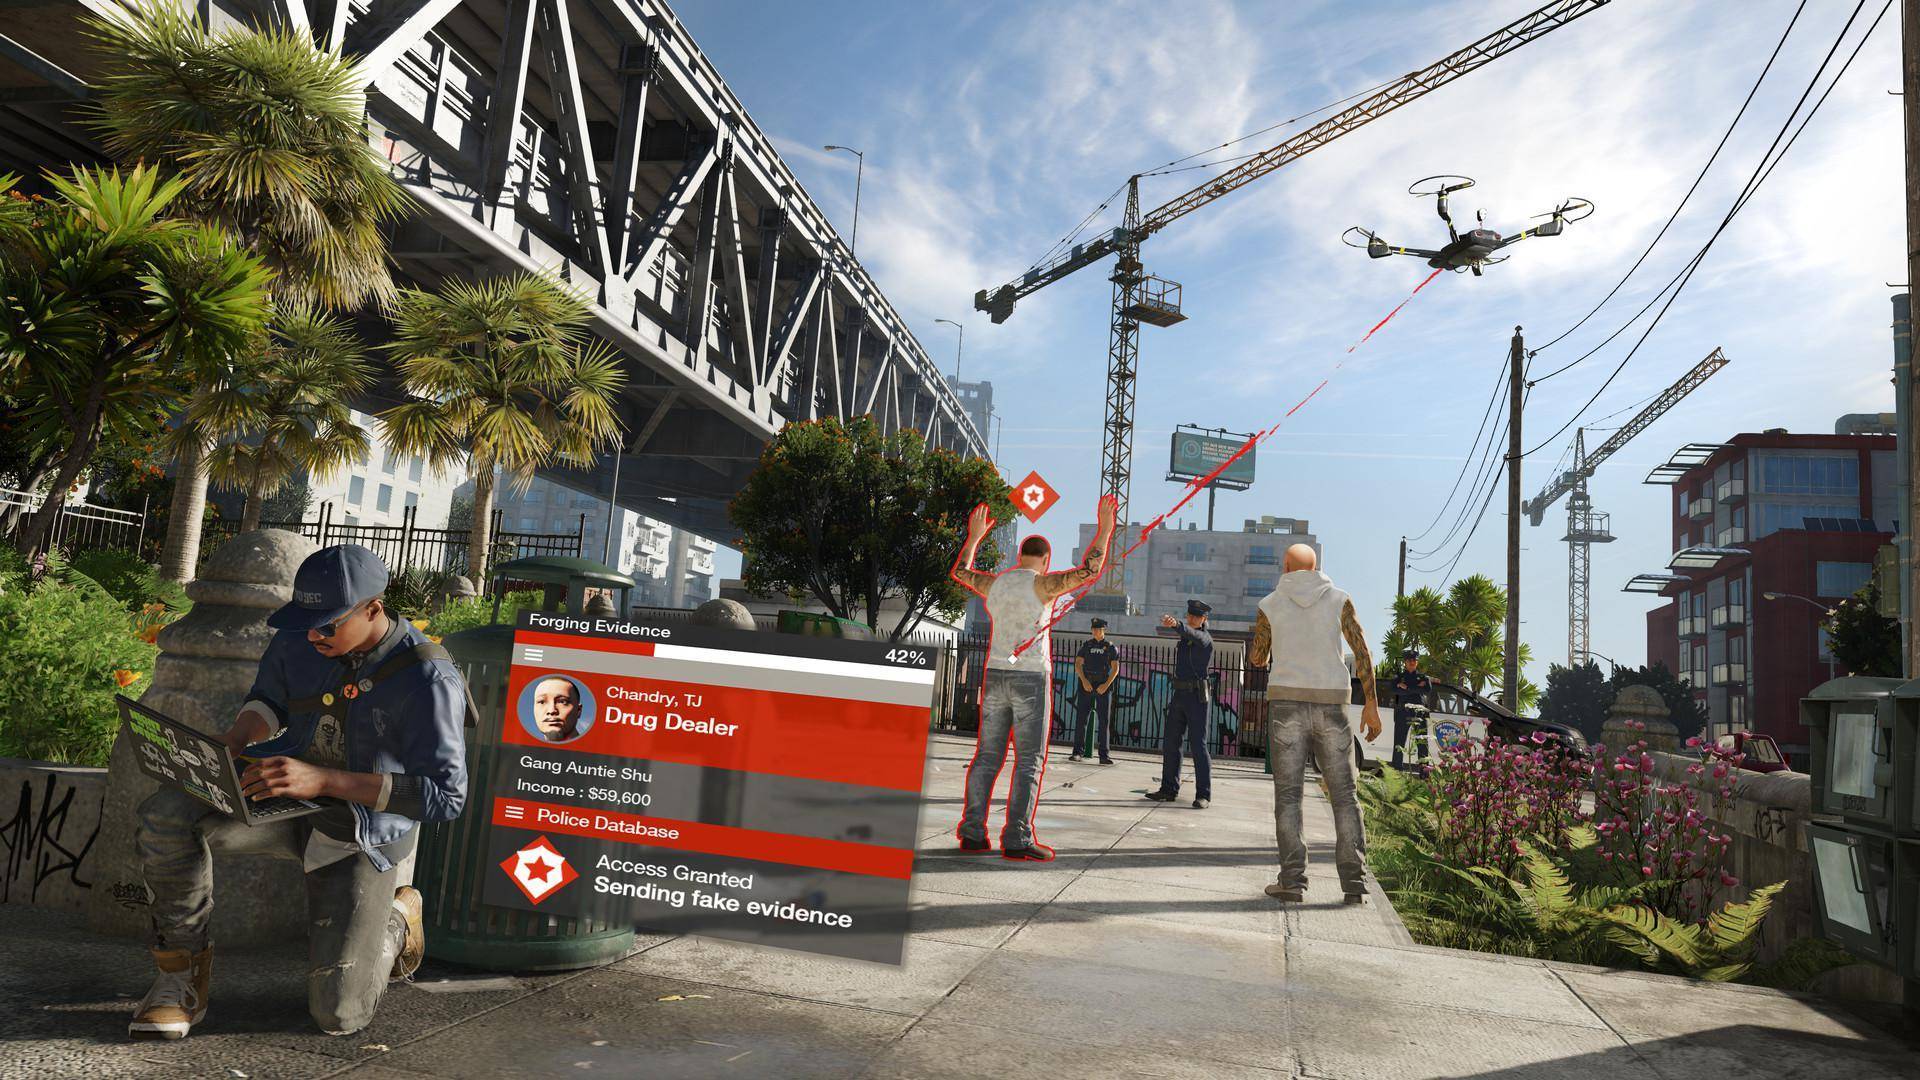 Watch Dogs 2 Deluxe Edition Pc Key Cheap Price Of 7 66 For Uplay